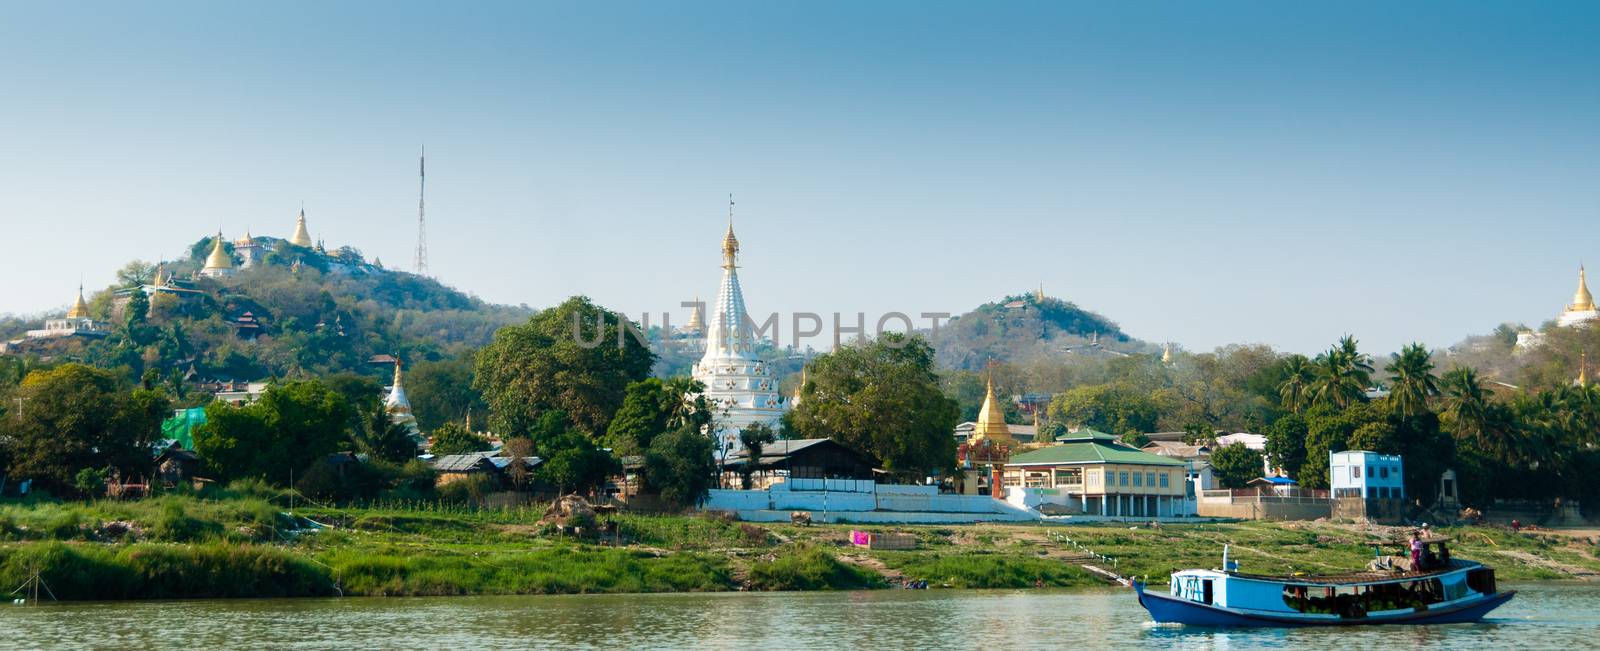 Boat on Irrawaddy river with Pagoda and village by attiarndt